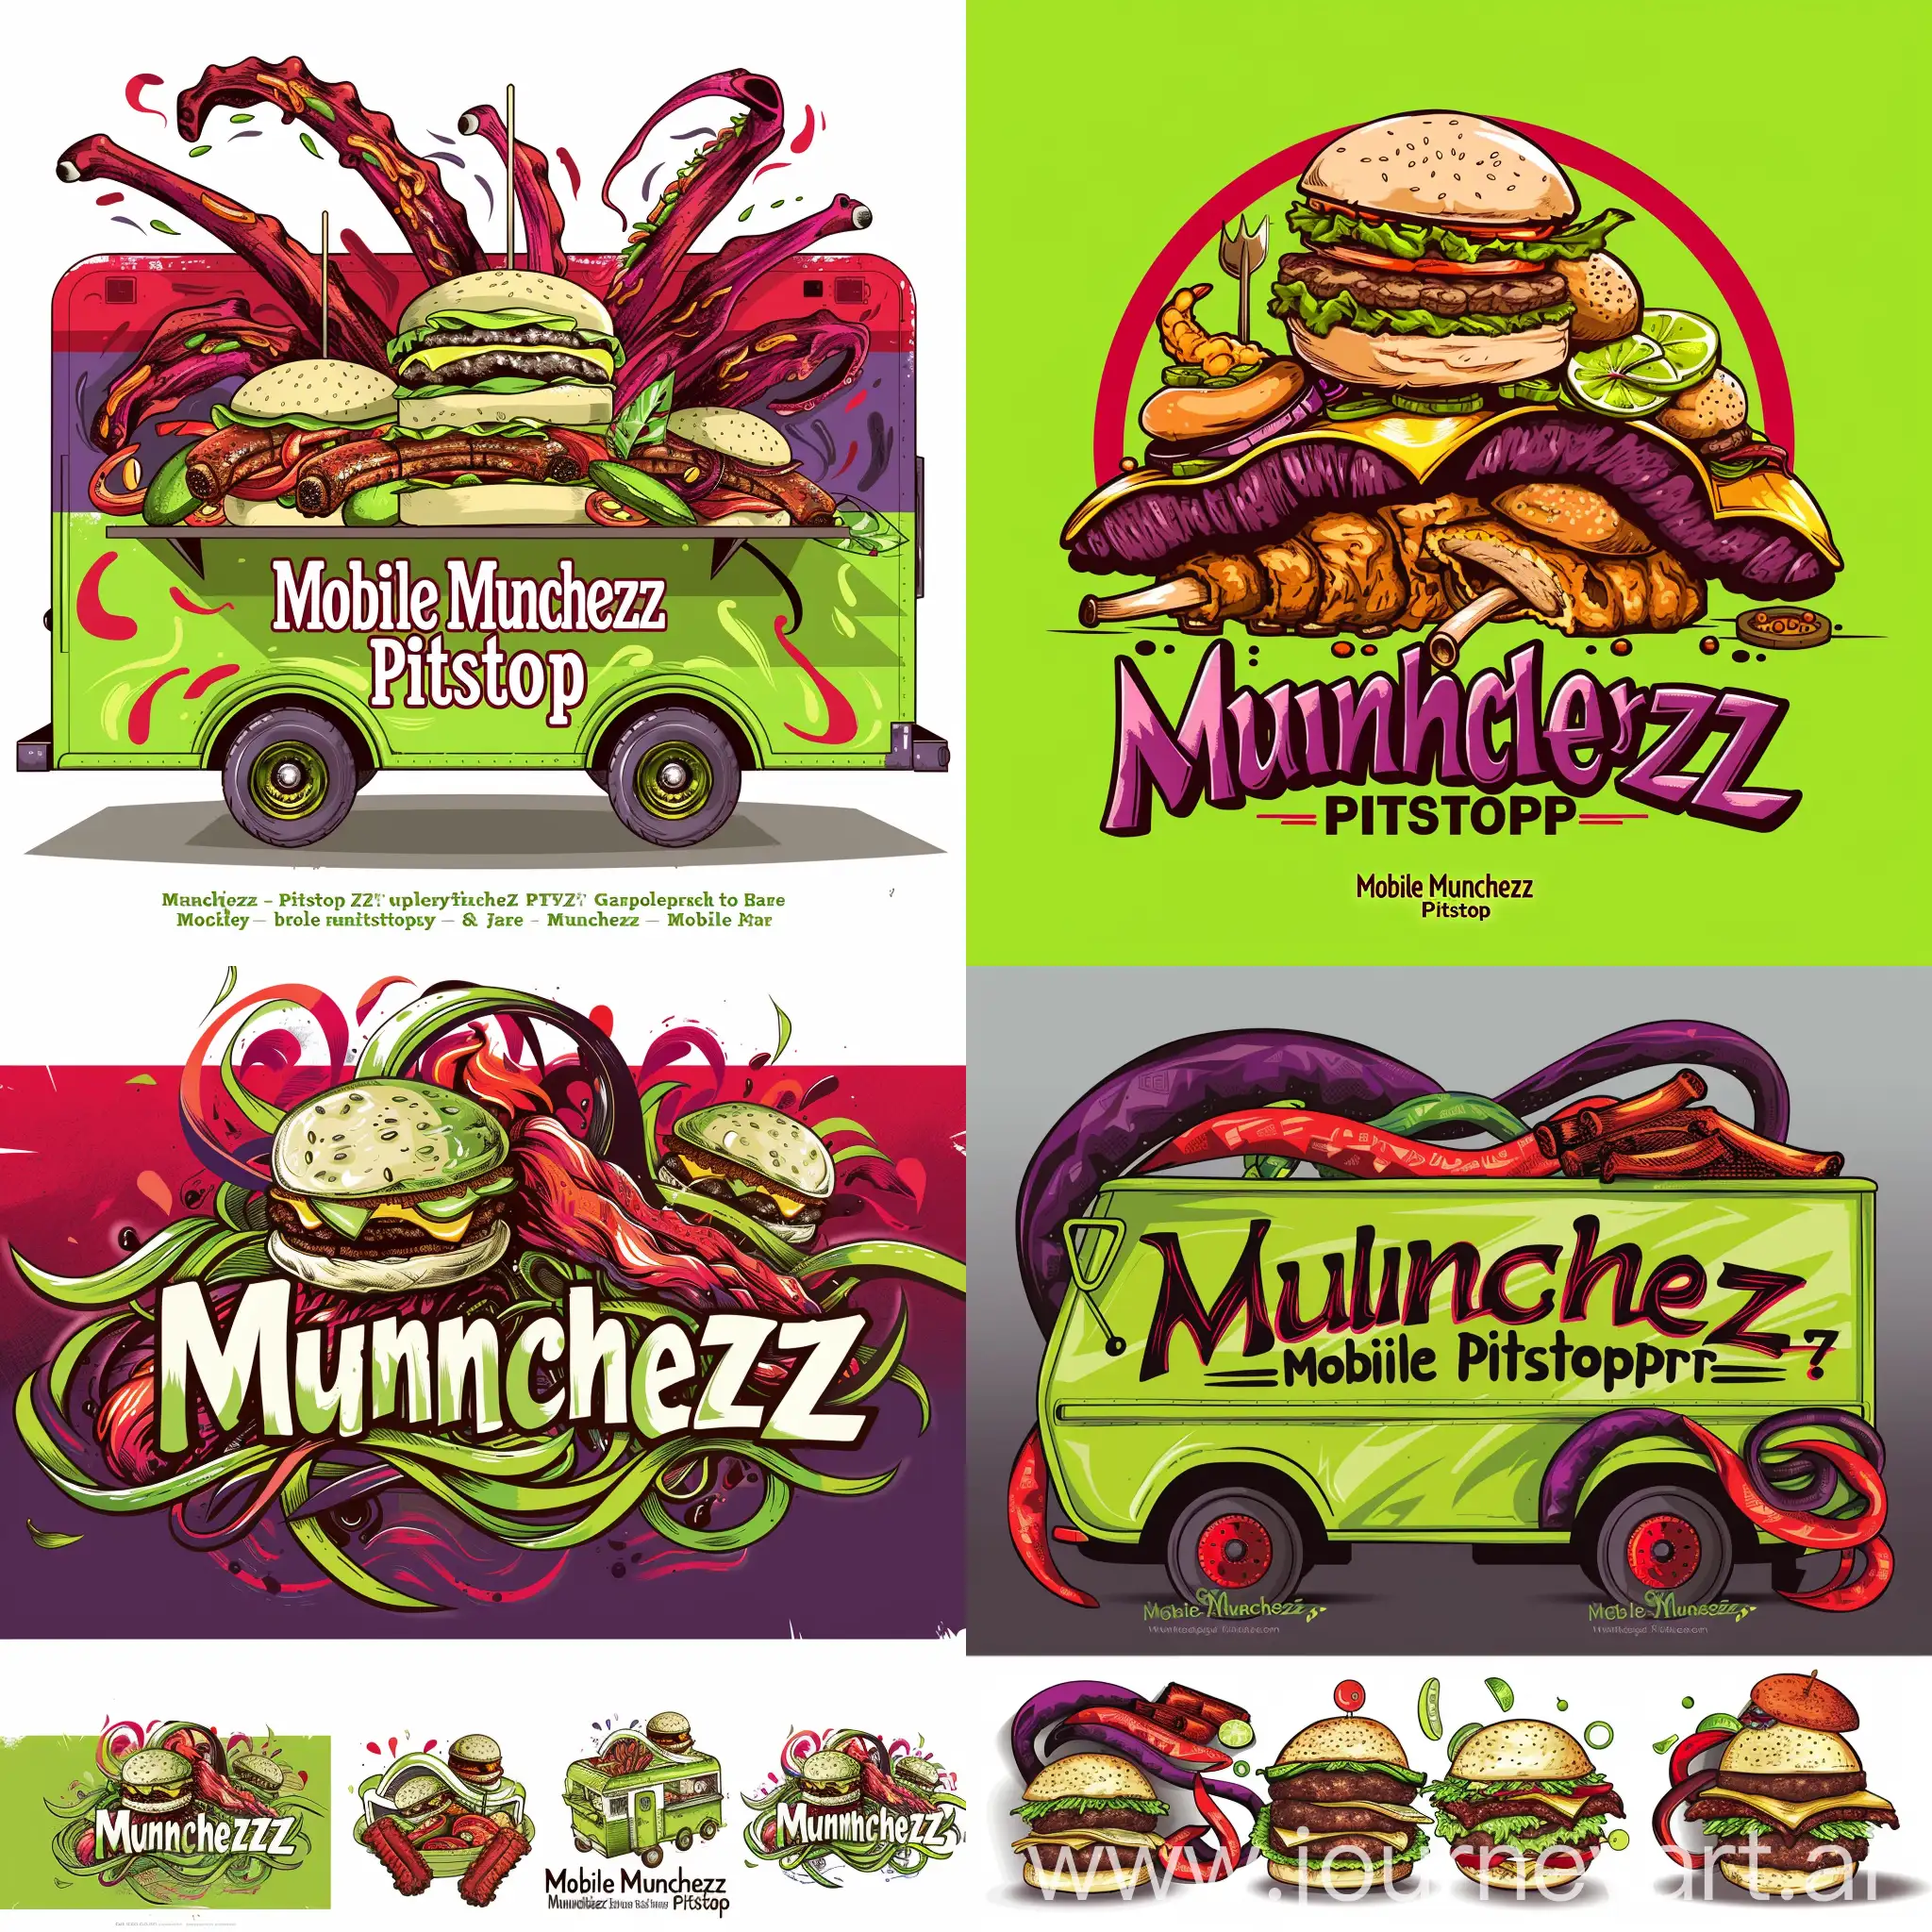  logo for “Mobile Munchezz Pitstop” food truck, featuring elements such as sandwiches, burgers, deep-fried ribs, global street food theme, fusion of assorted cuisines represented in an appetizing and humorous way, color scheme should include lime green, red, and purple, the design must be highly creative and embody the fusion street food concept